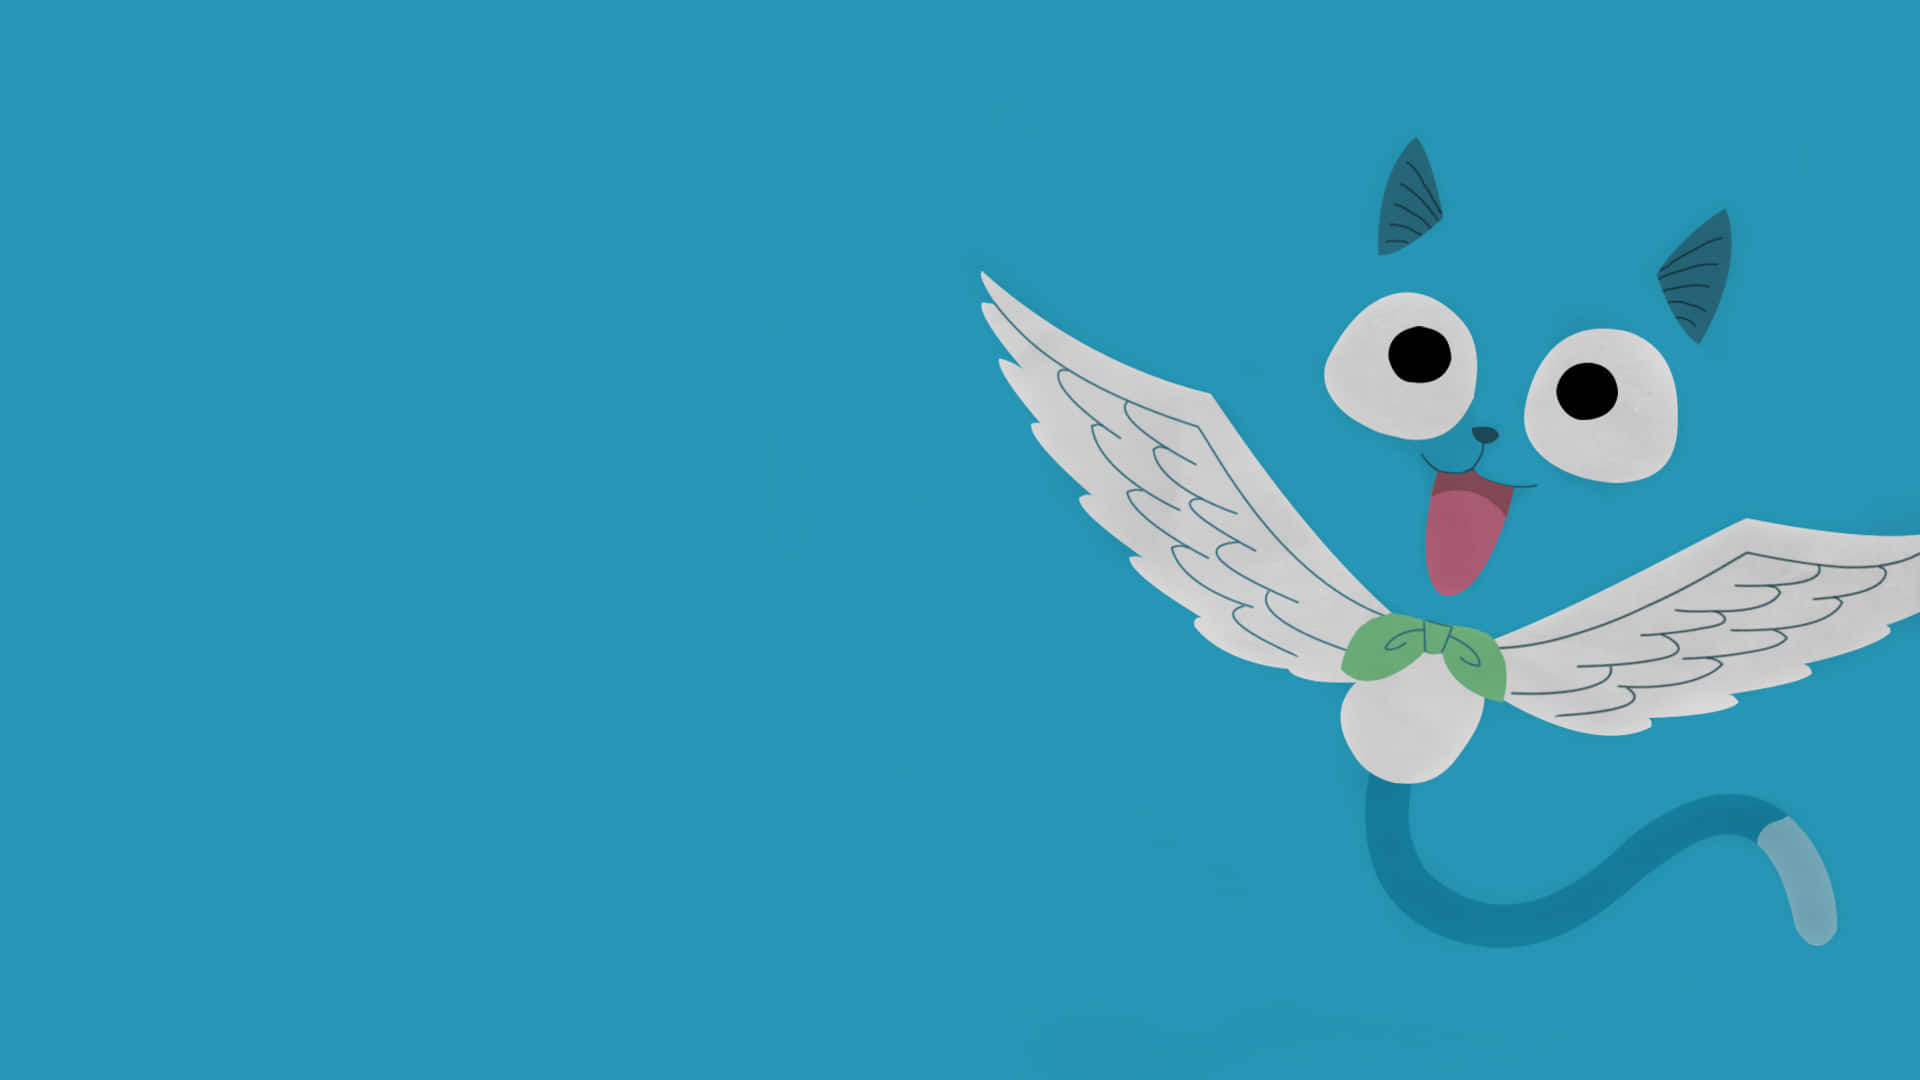 A Cartoon Character With Wings Flying In The Air Wallpaper